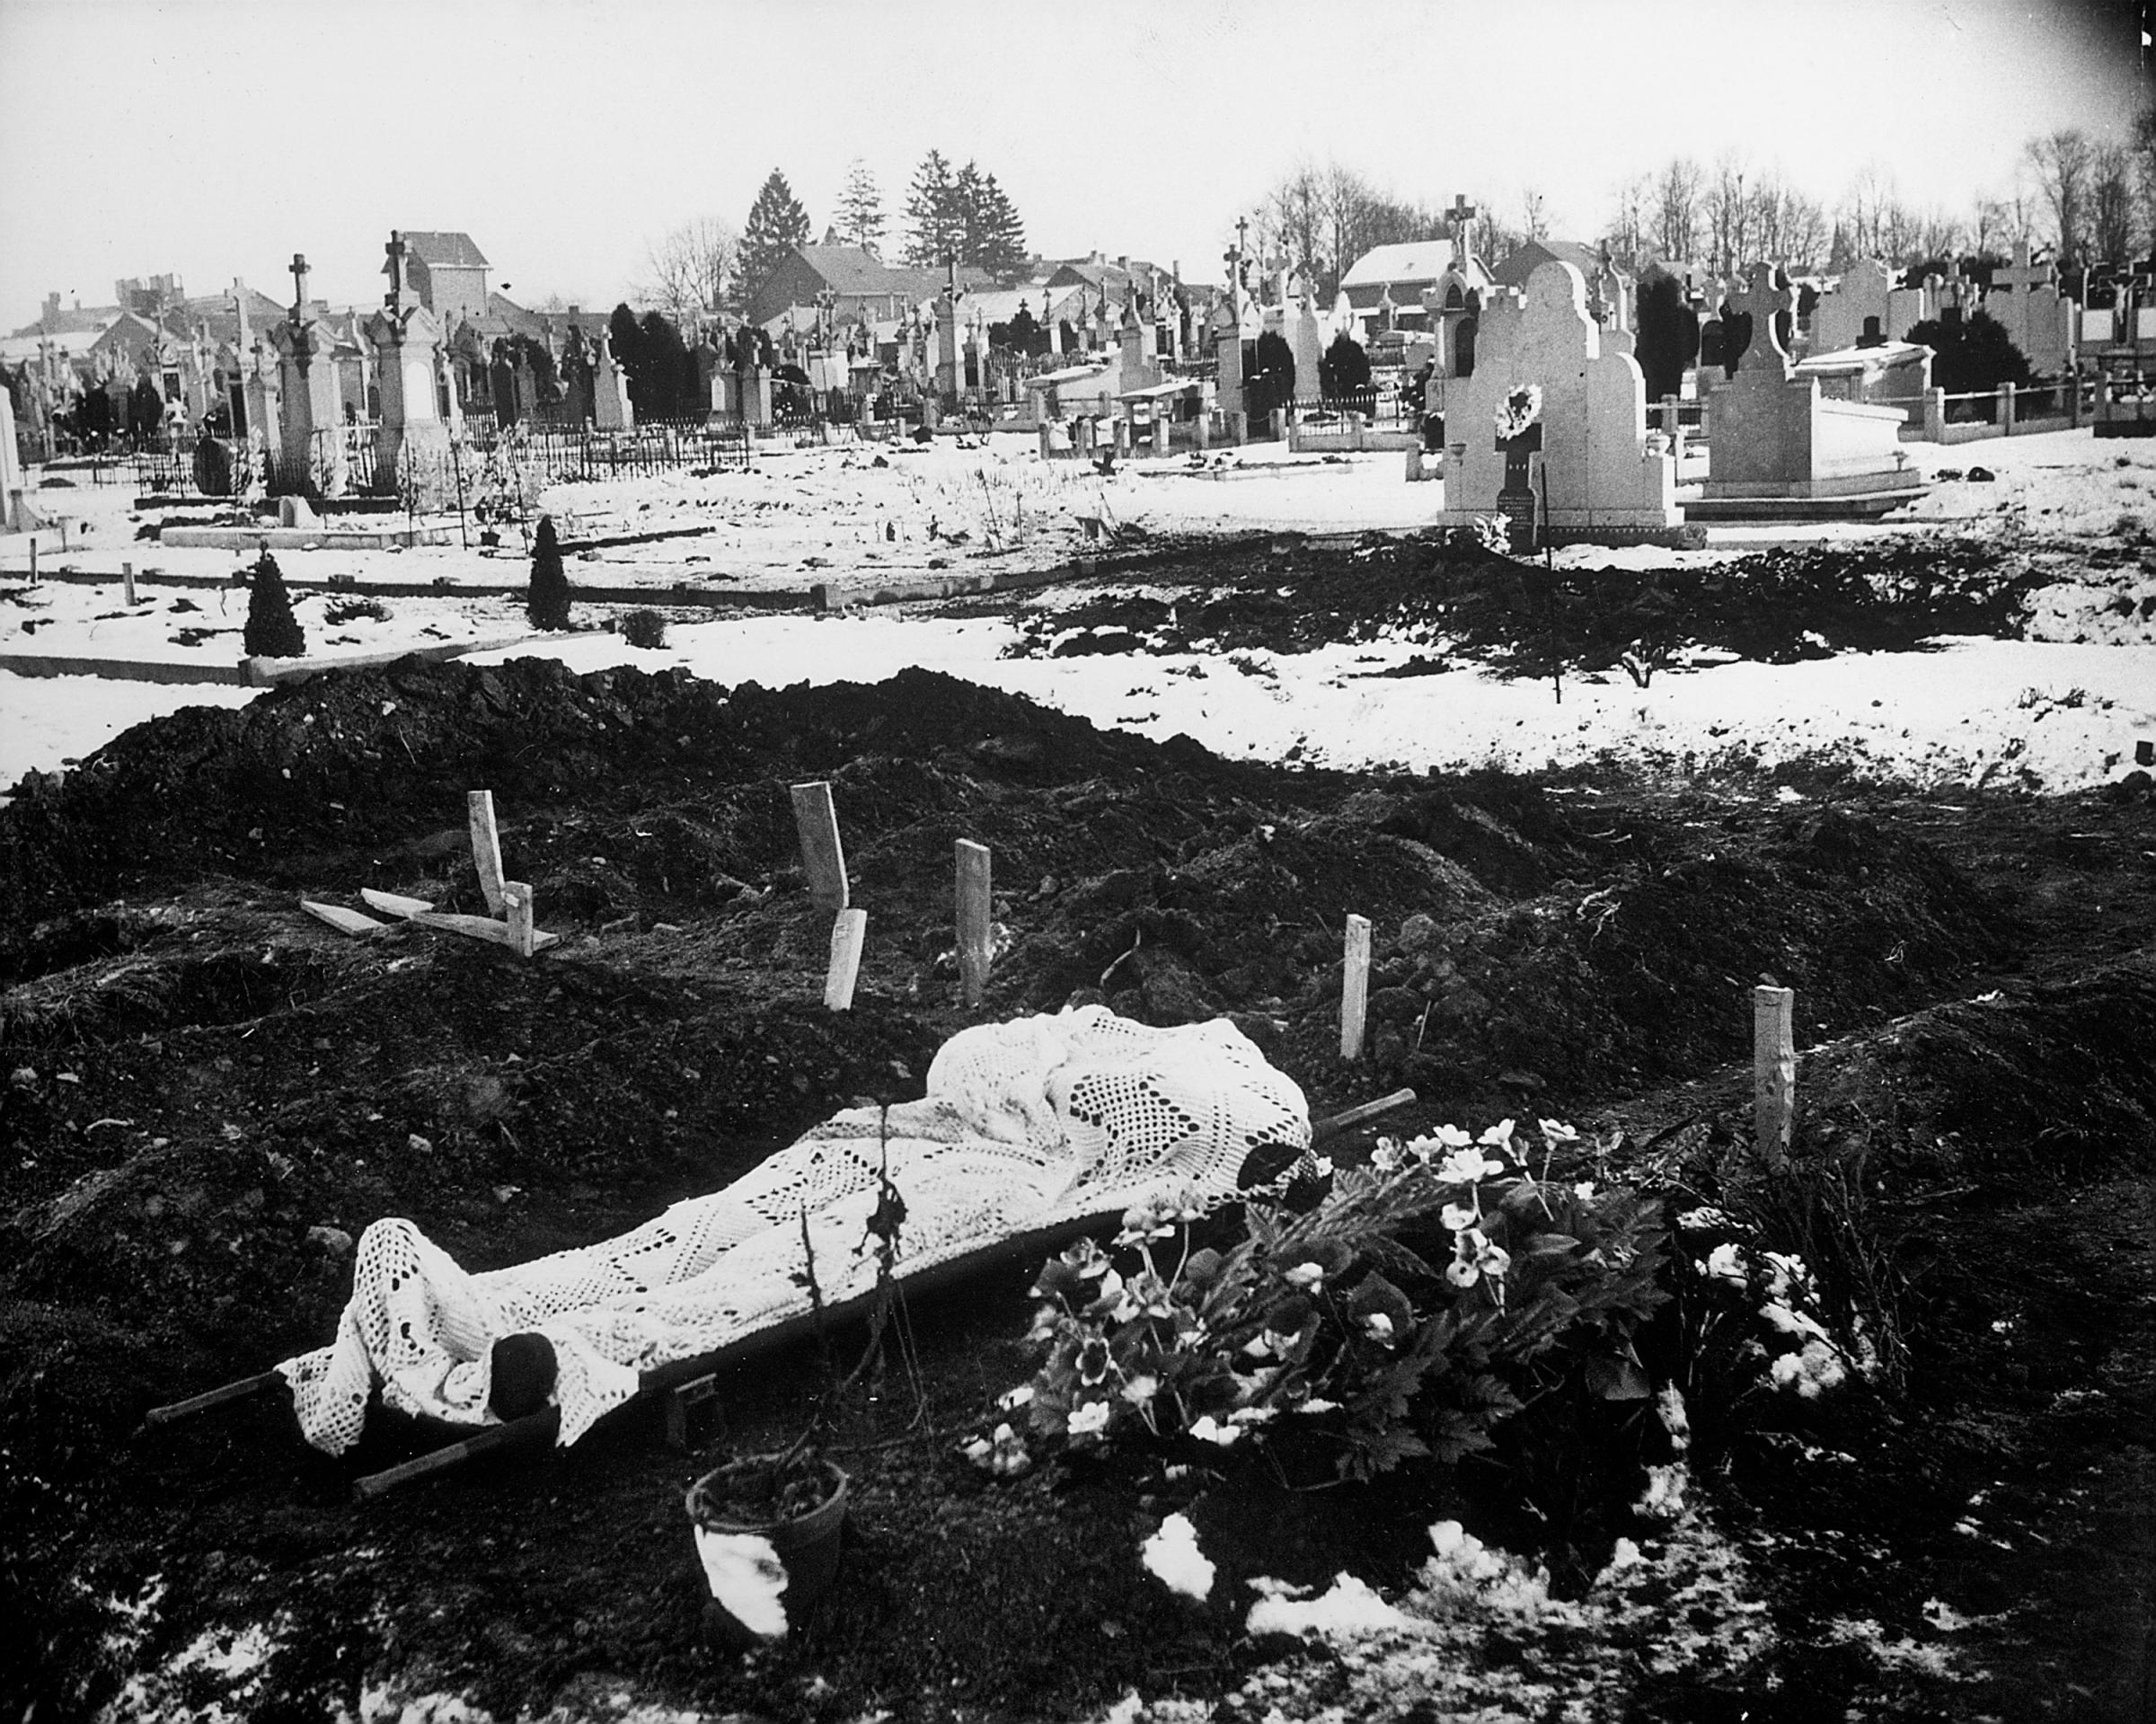 Lace curtain shrouds body of an American soldier awaiting burial in Bastogne cemetery, January 1945.